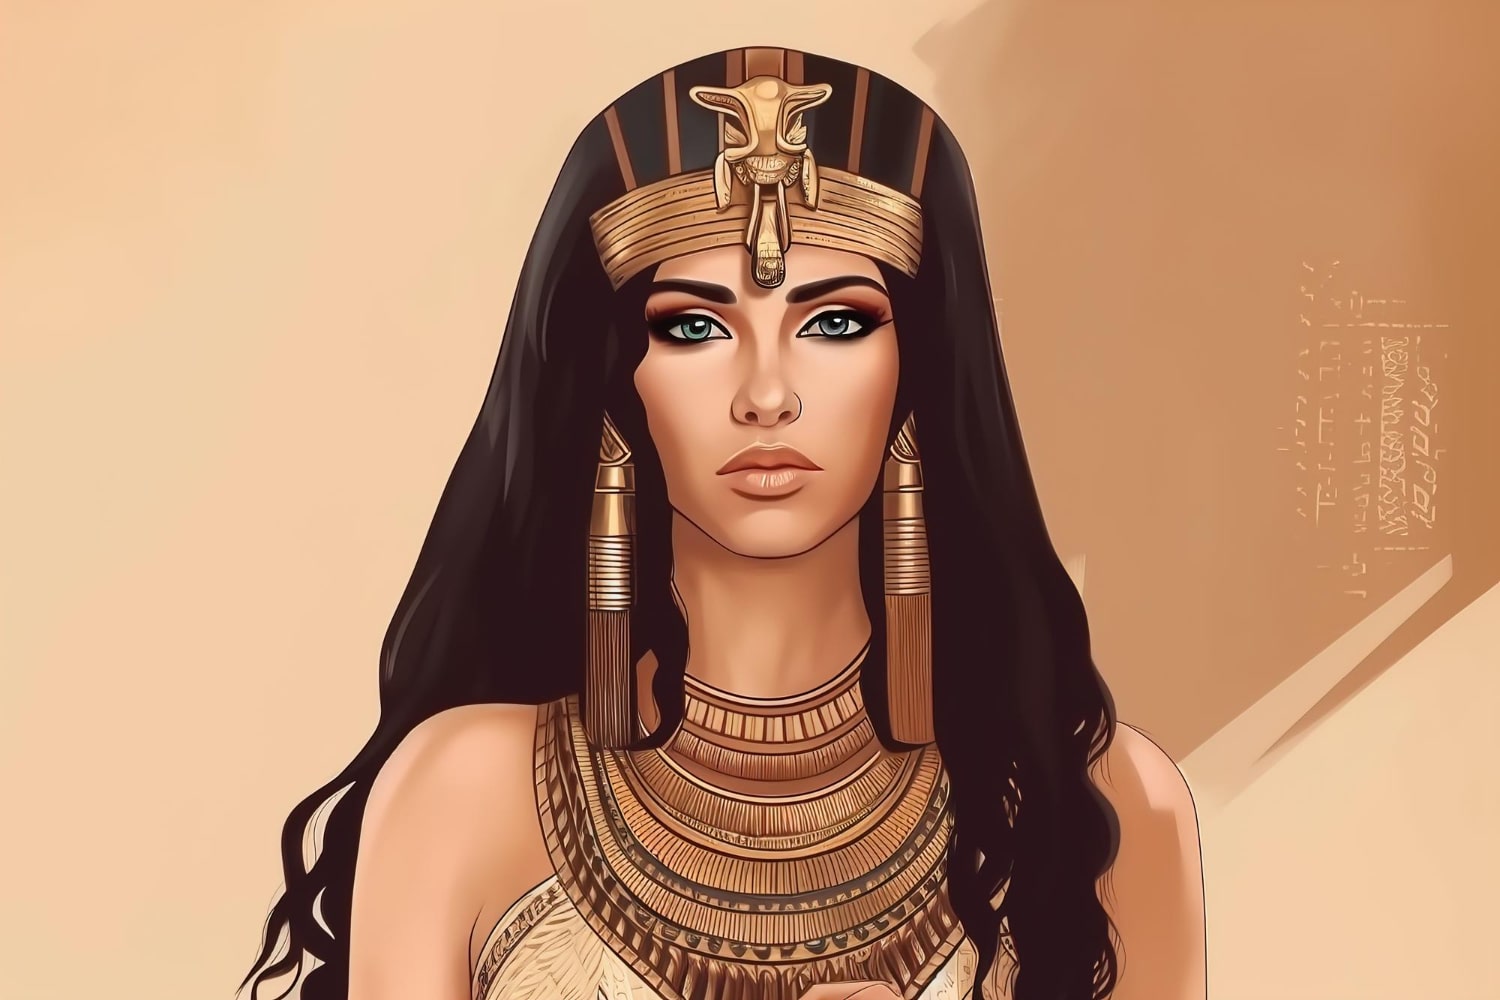 23 interesting facts about Cleopatra